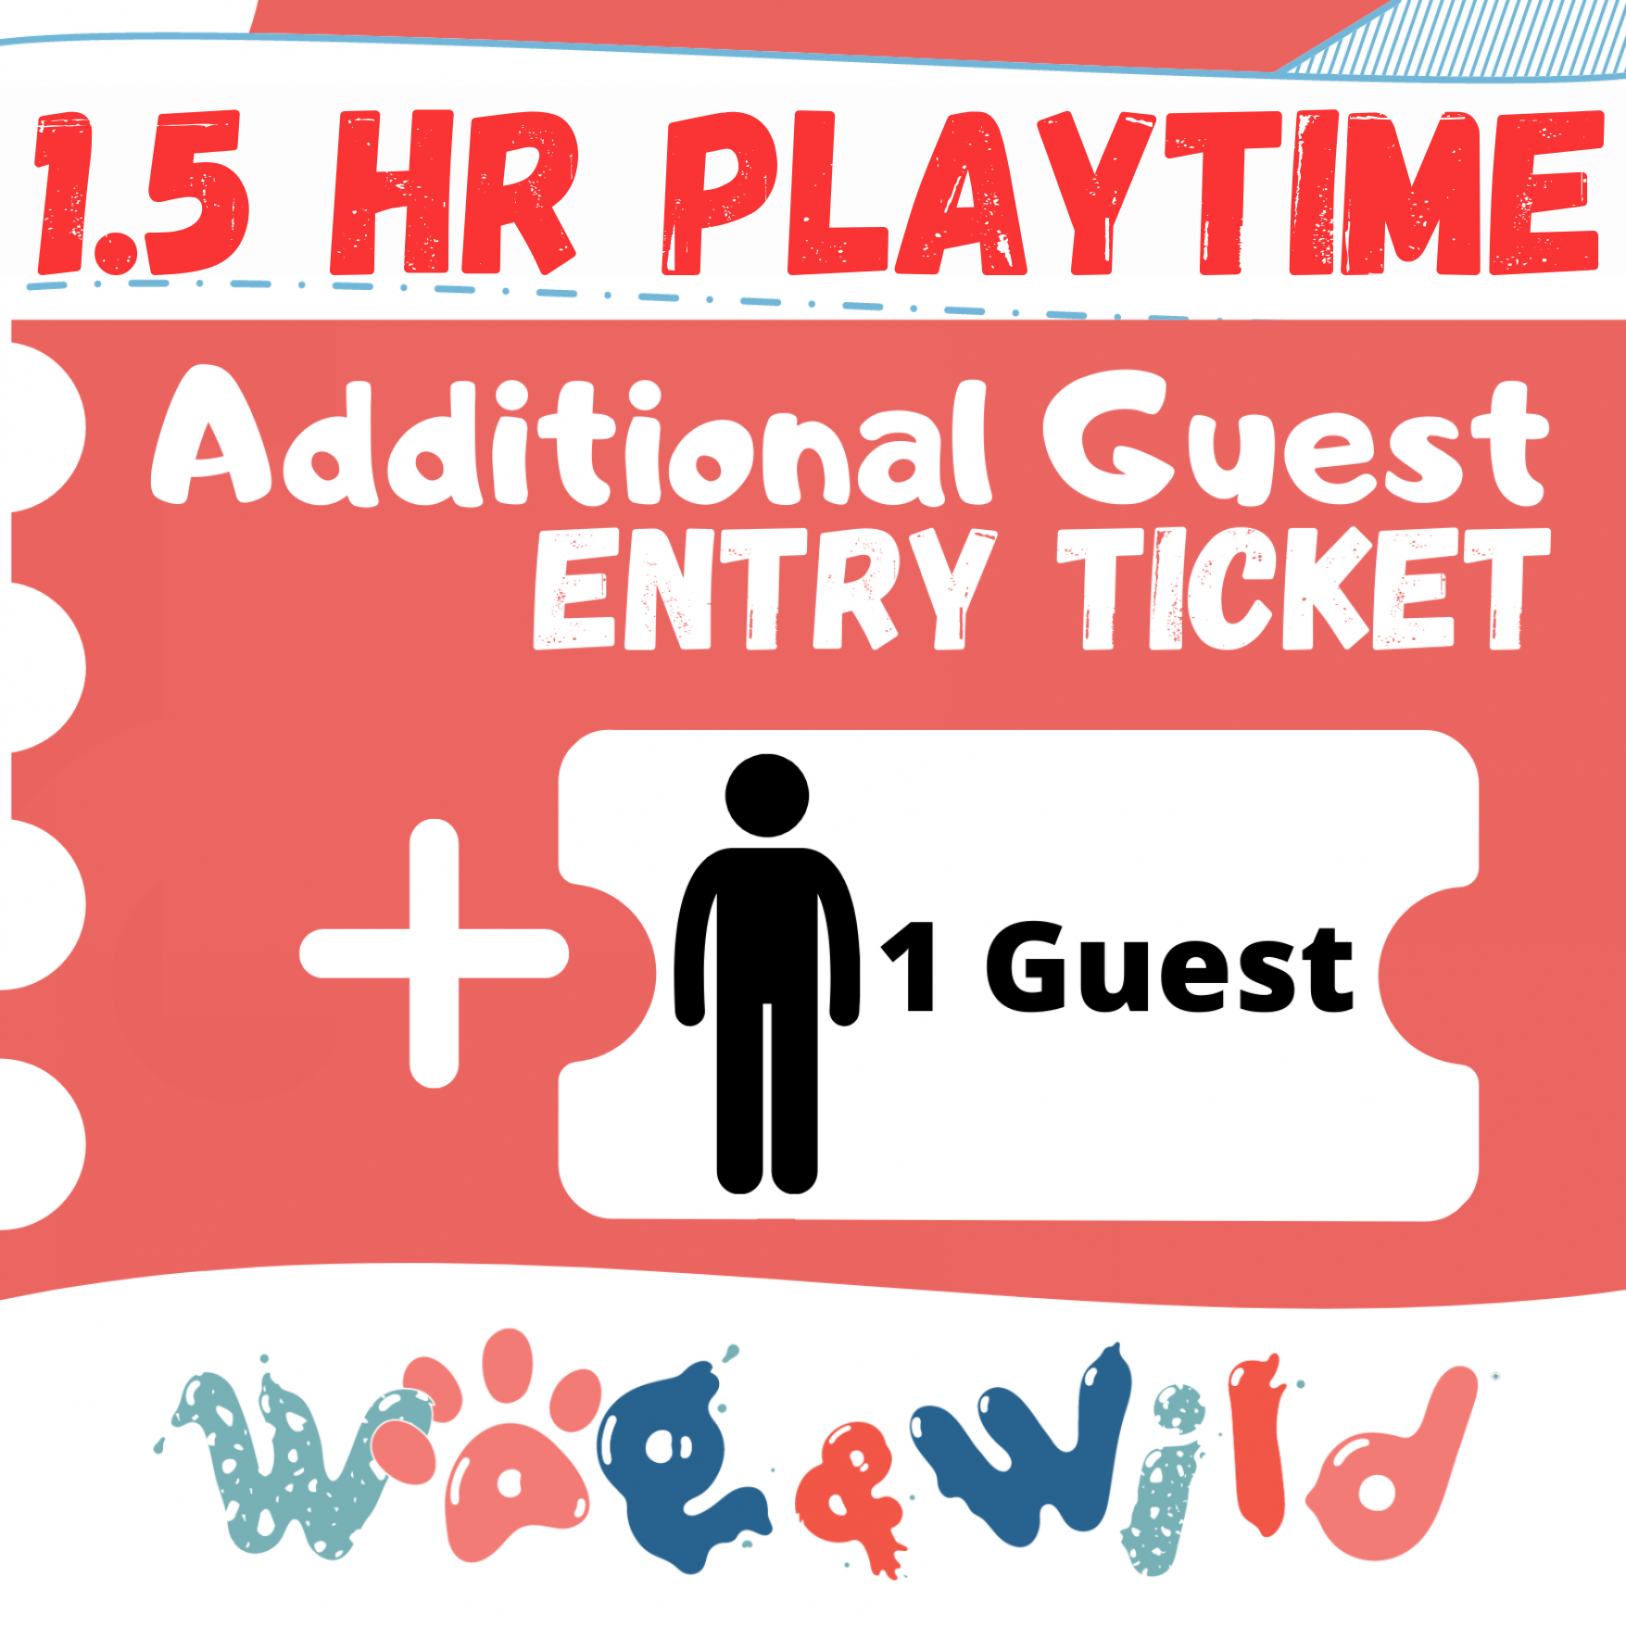 Additional Guest Ticket